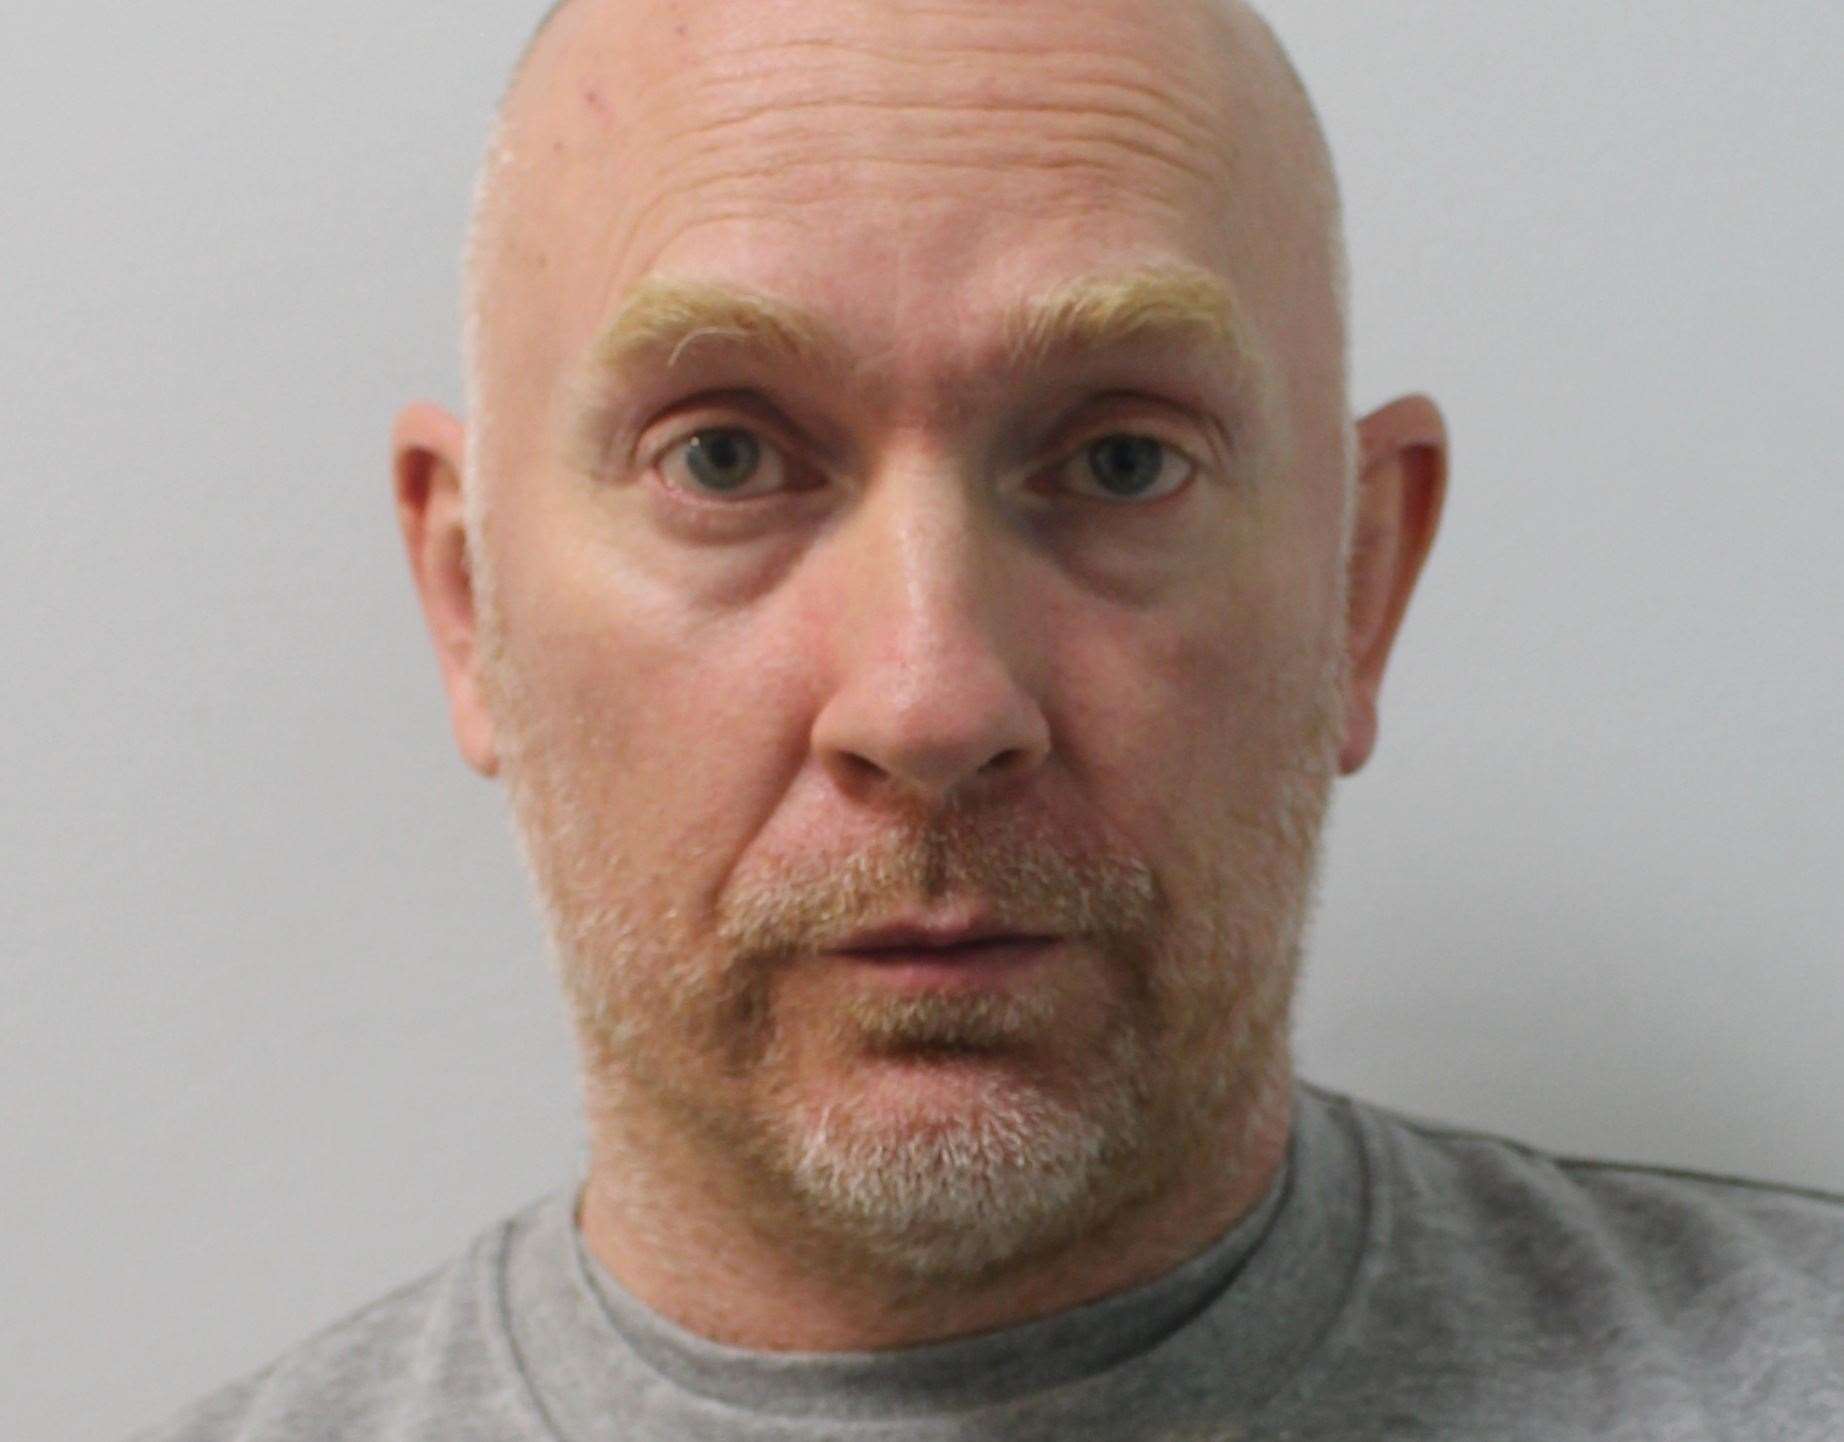 Wayne Couzens has been sentence to life for the murder, rape and kidnap of Sarah Everard. Photo: Met Police